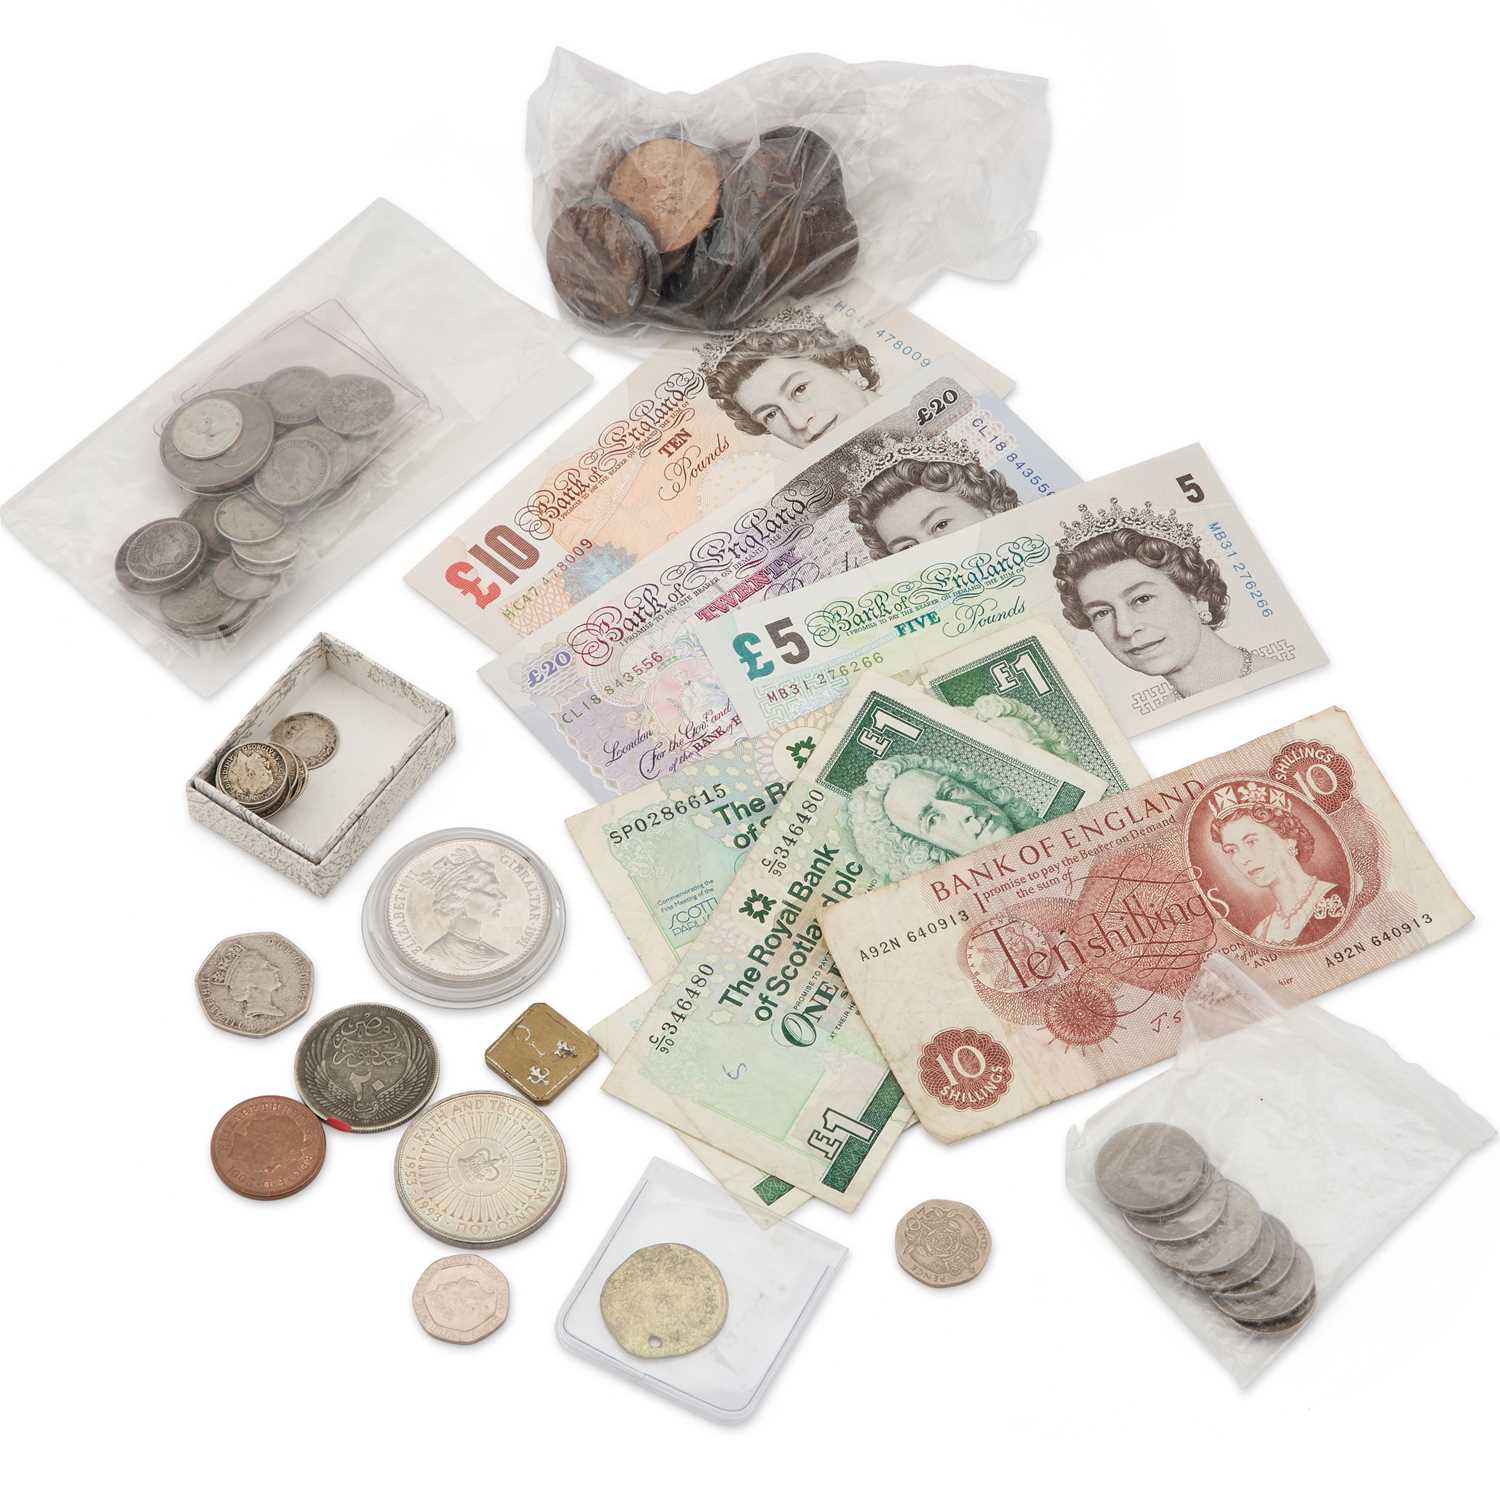 A COLLECTION OF COINS AND BANKNOTES